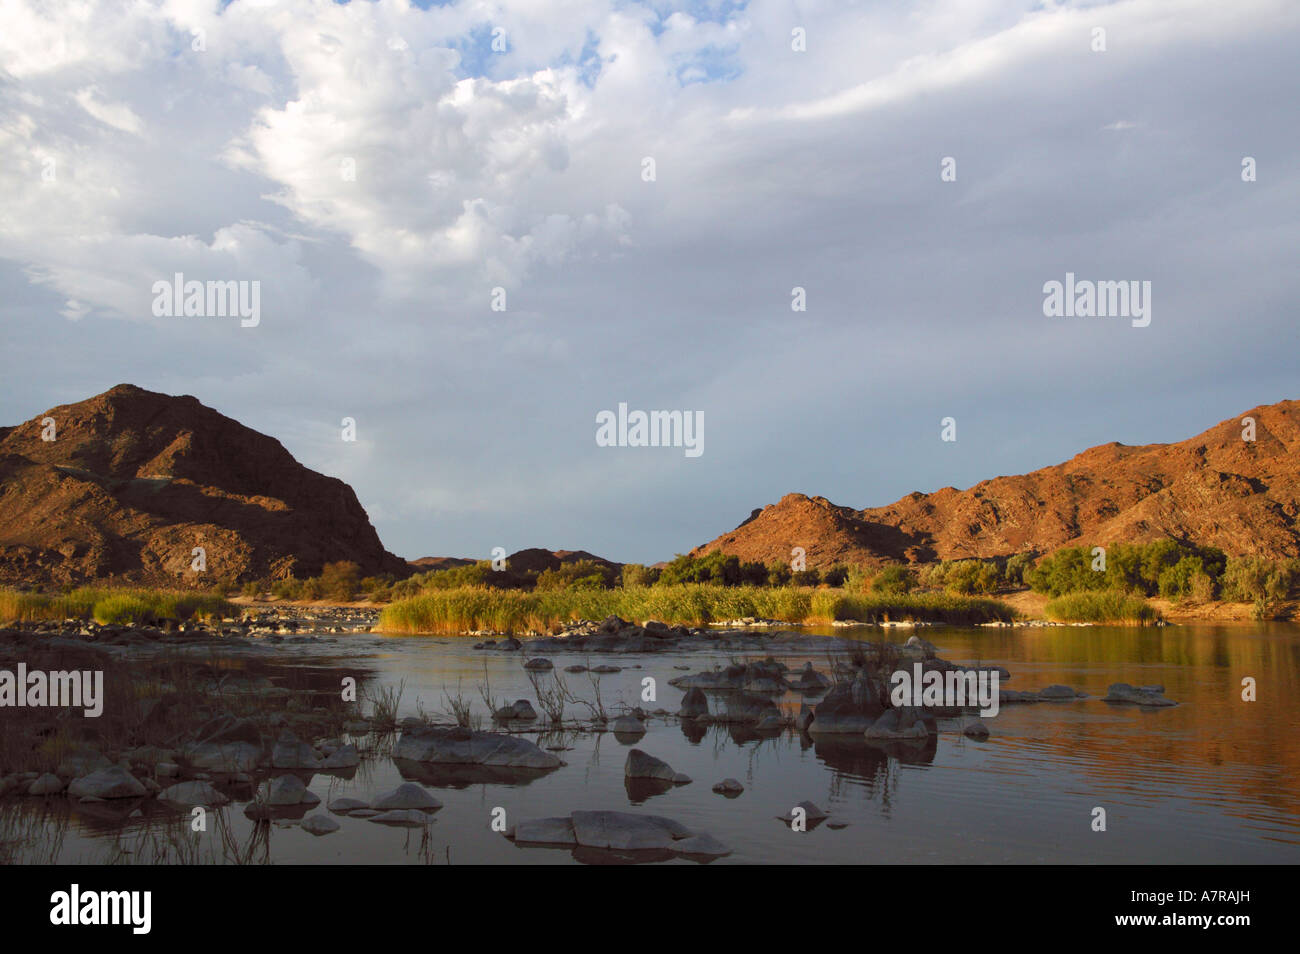 A tranquil scene on the Orange River in the Richtersveld Northern Cape South Africa Stock Photo